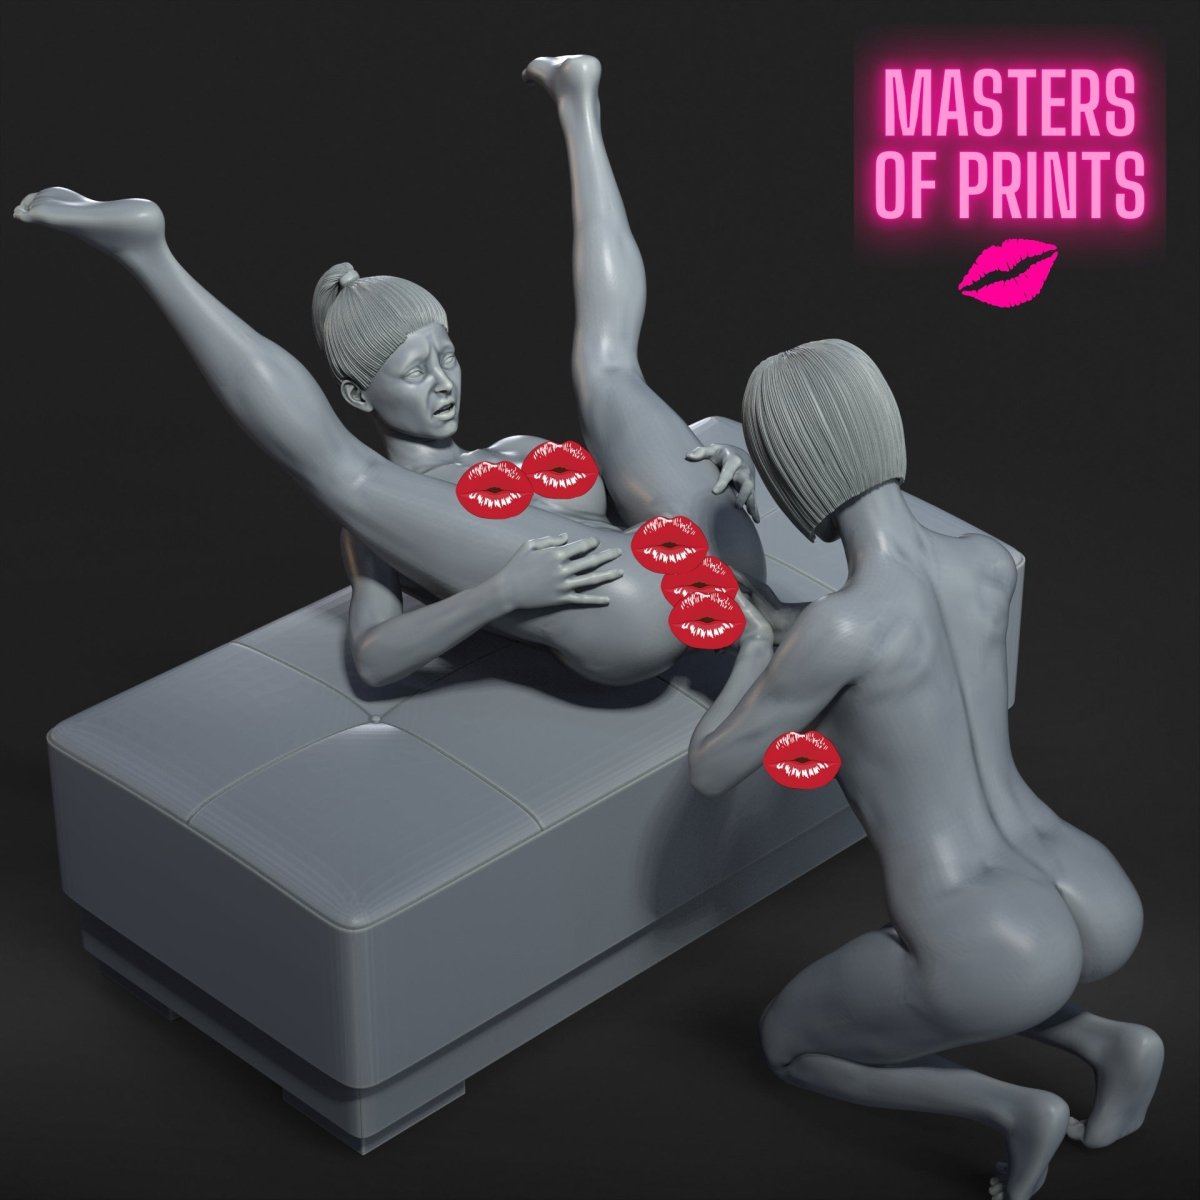 Lesbians 313 Mature 3d Printed miniature FanArt by Masters Of Prints Collectables Statues & Figurines